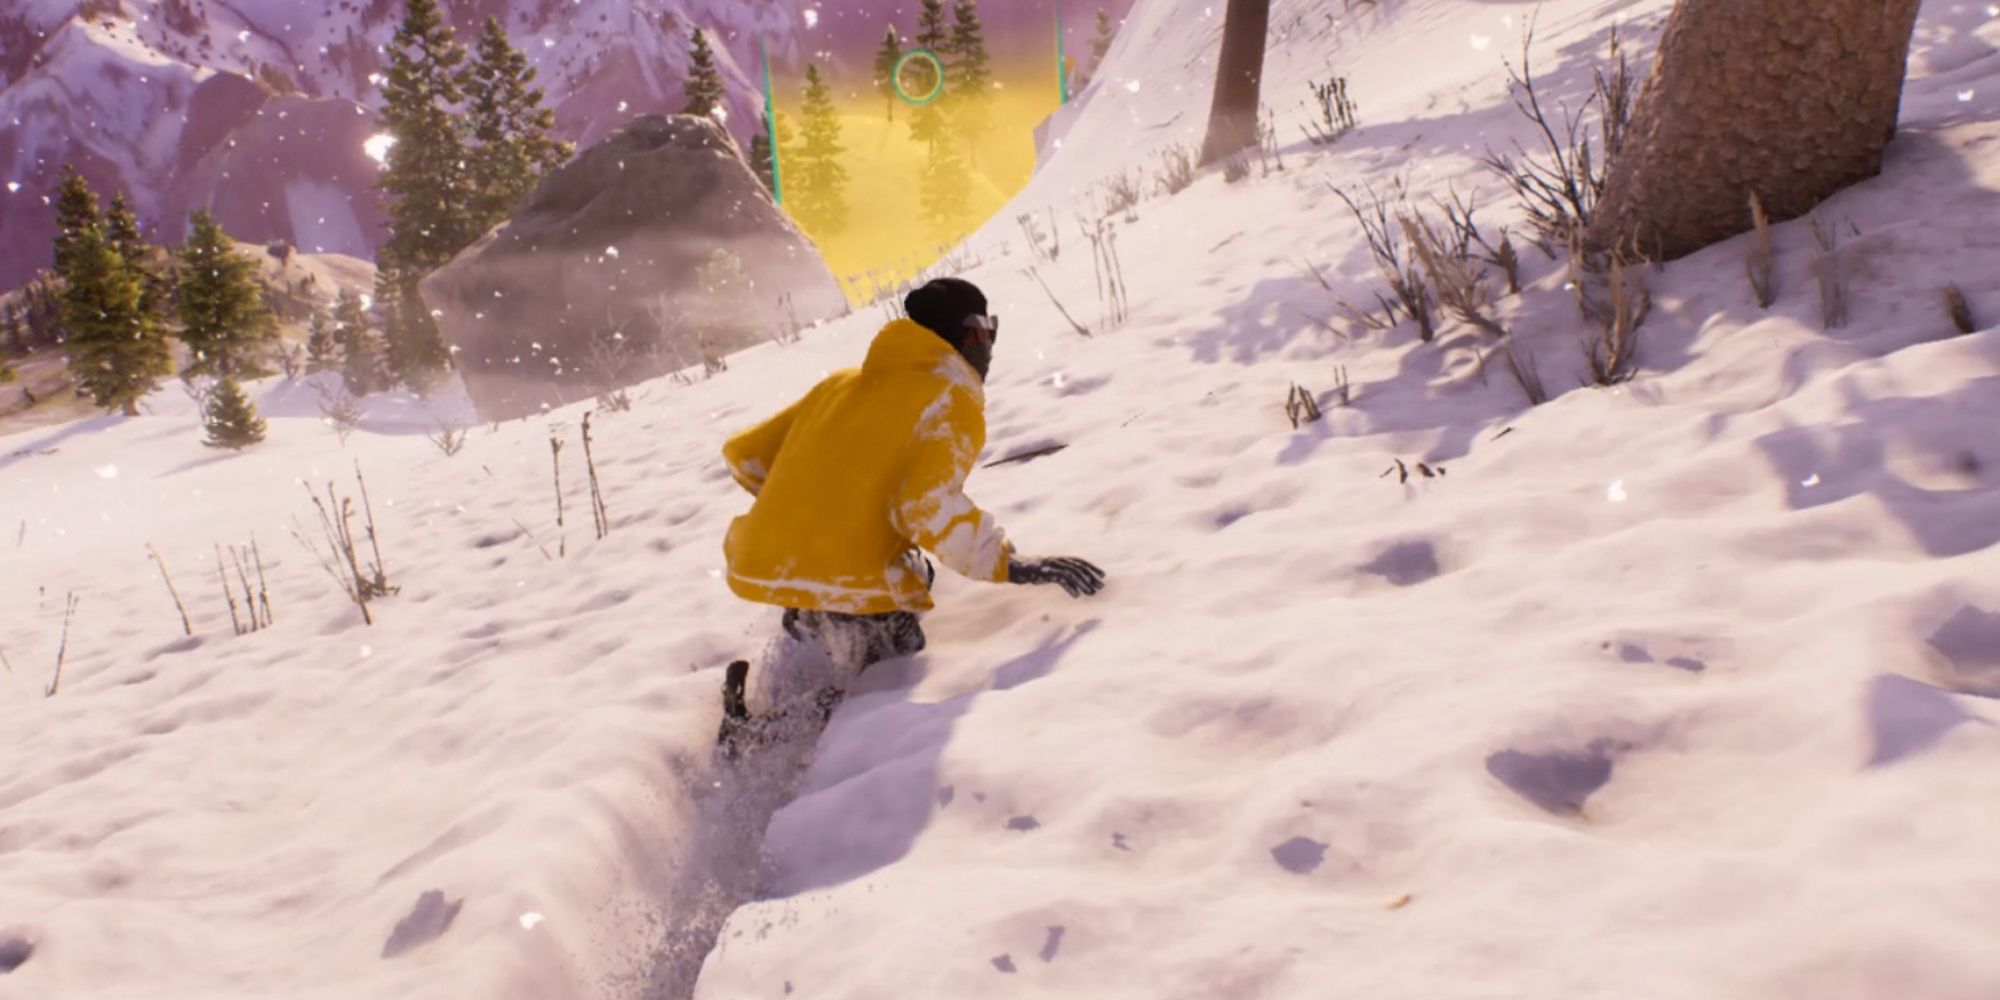 Riders Republic. Riding a snowboard in deep snow. Wearing a bright yellow jacket.